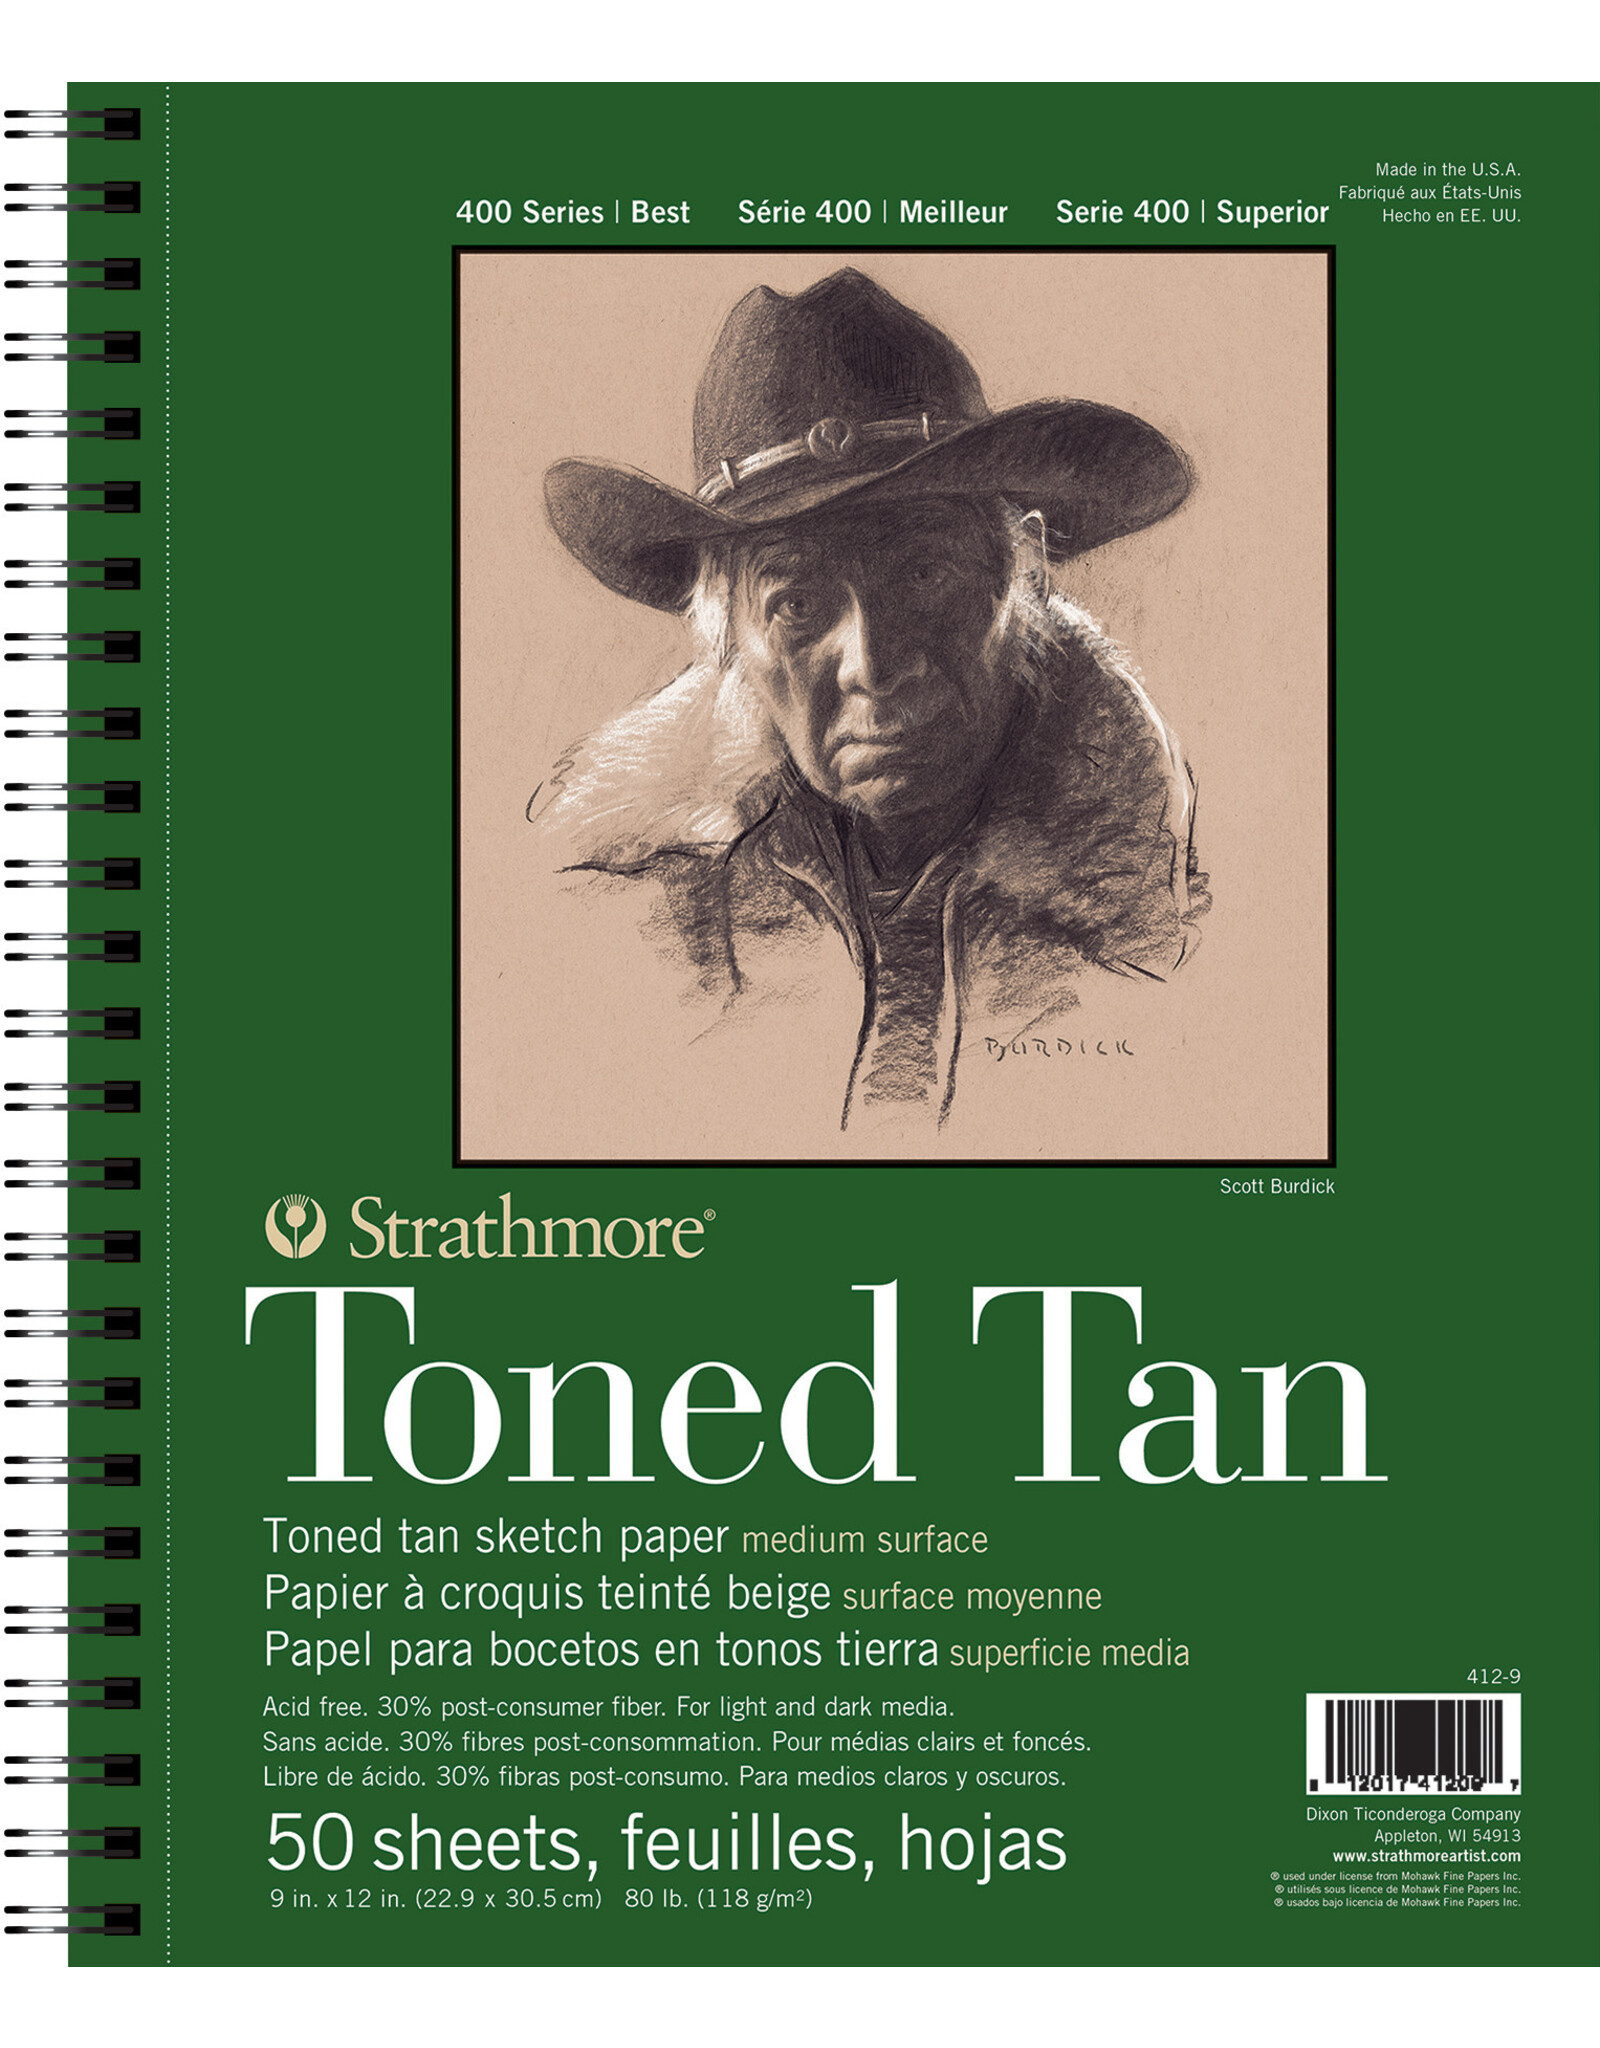 Strathmore Strathmore 400 Toned Tan Sketch Pad, 50 Sheets, 9” x 12”